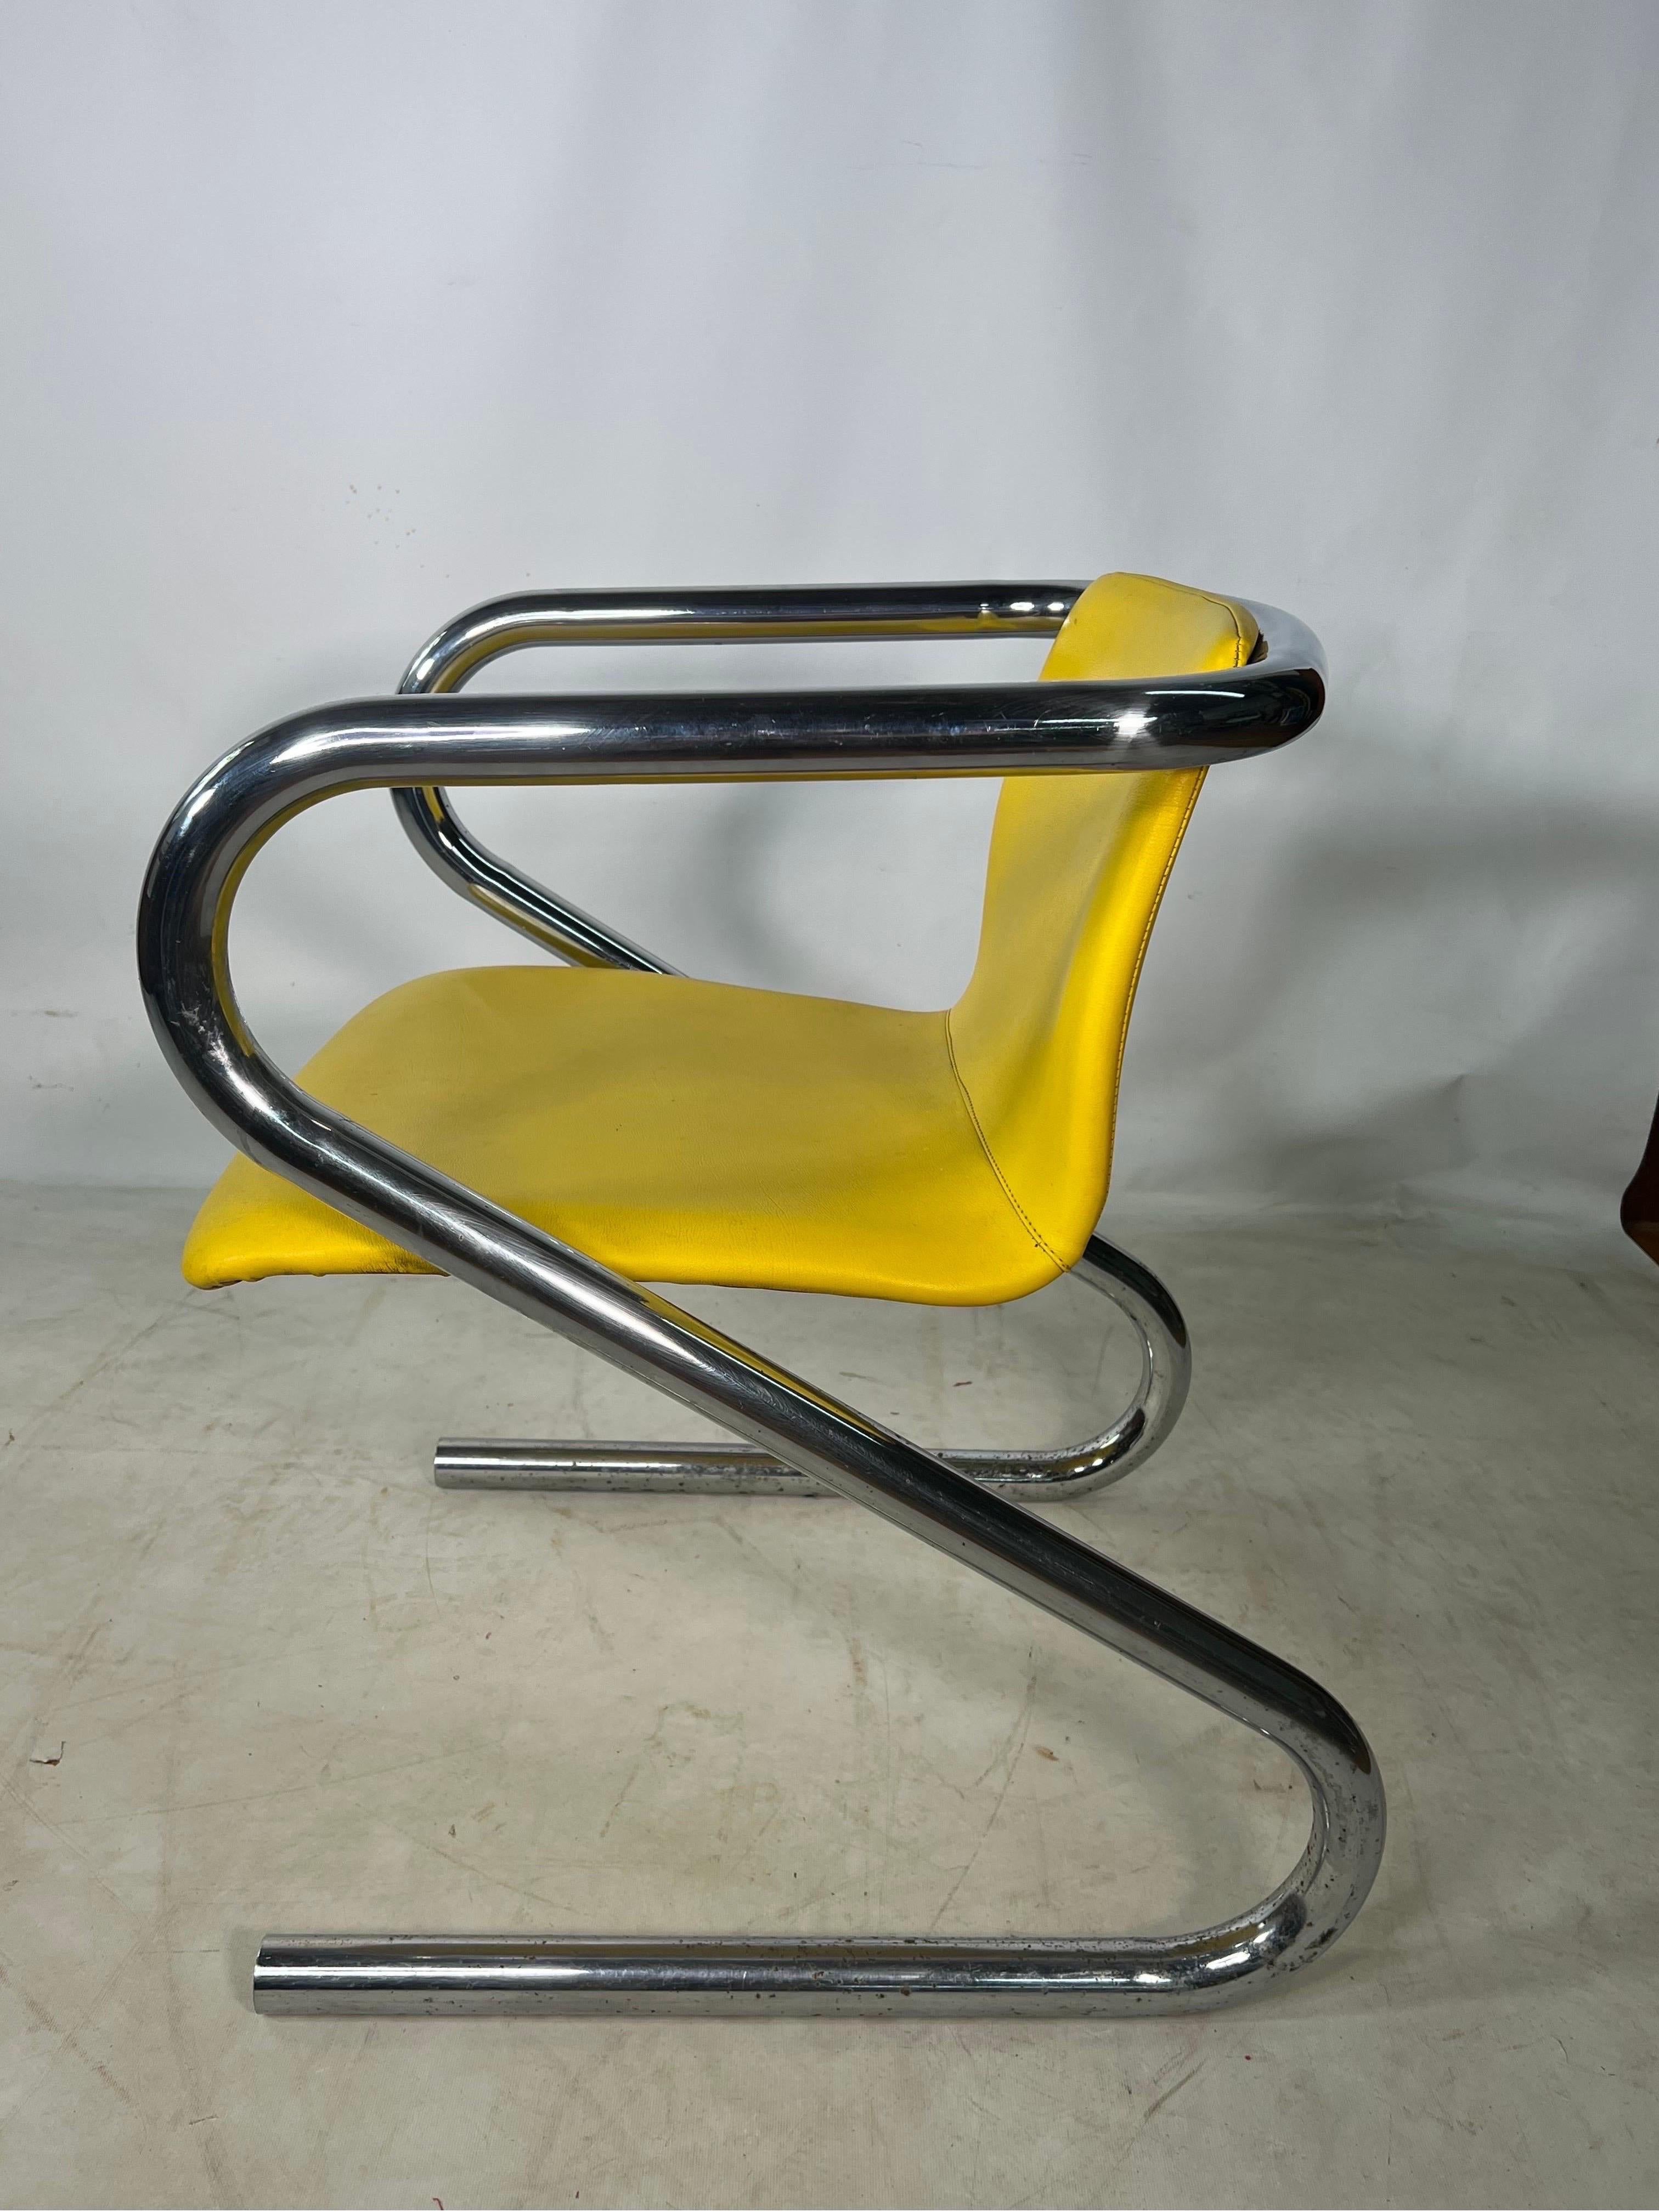 yellow dining chairs